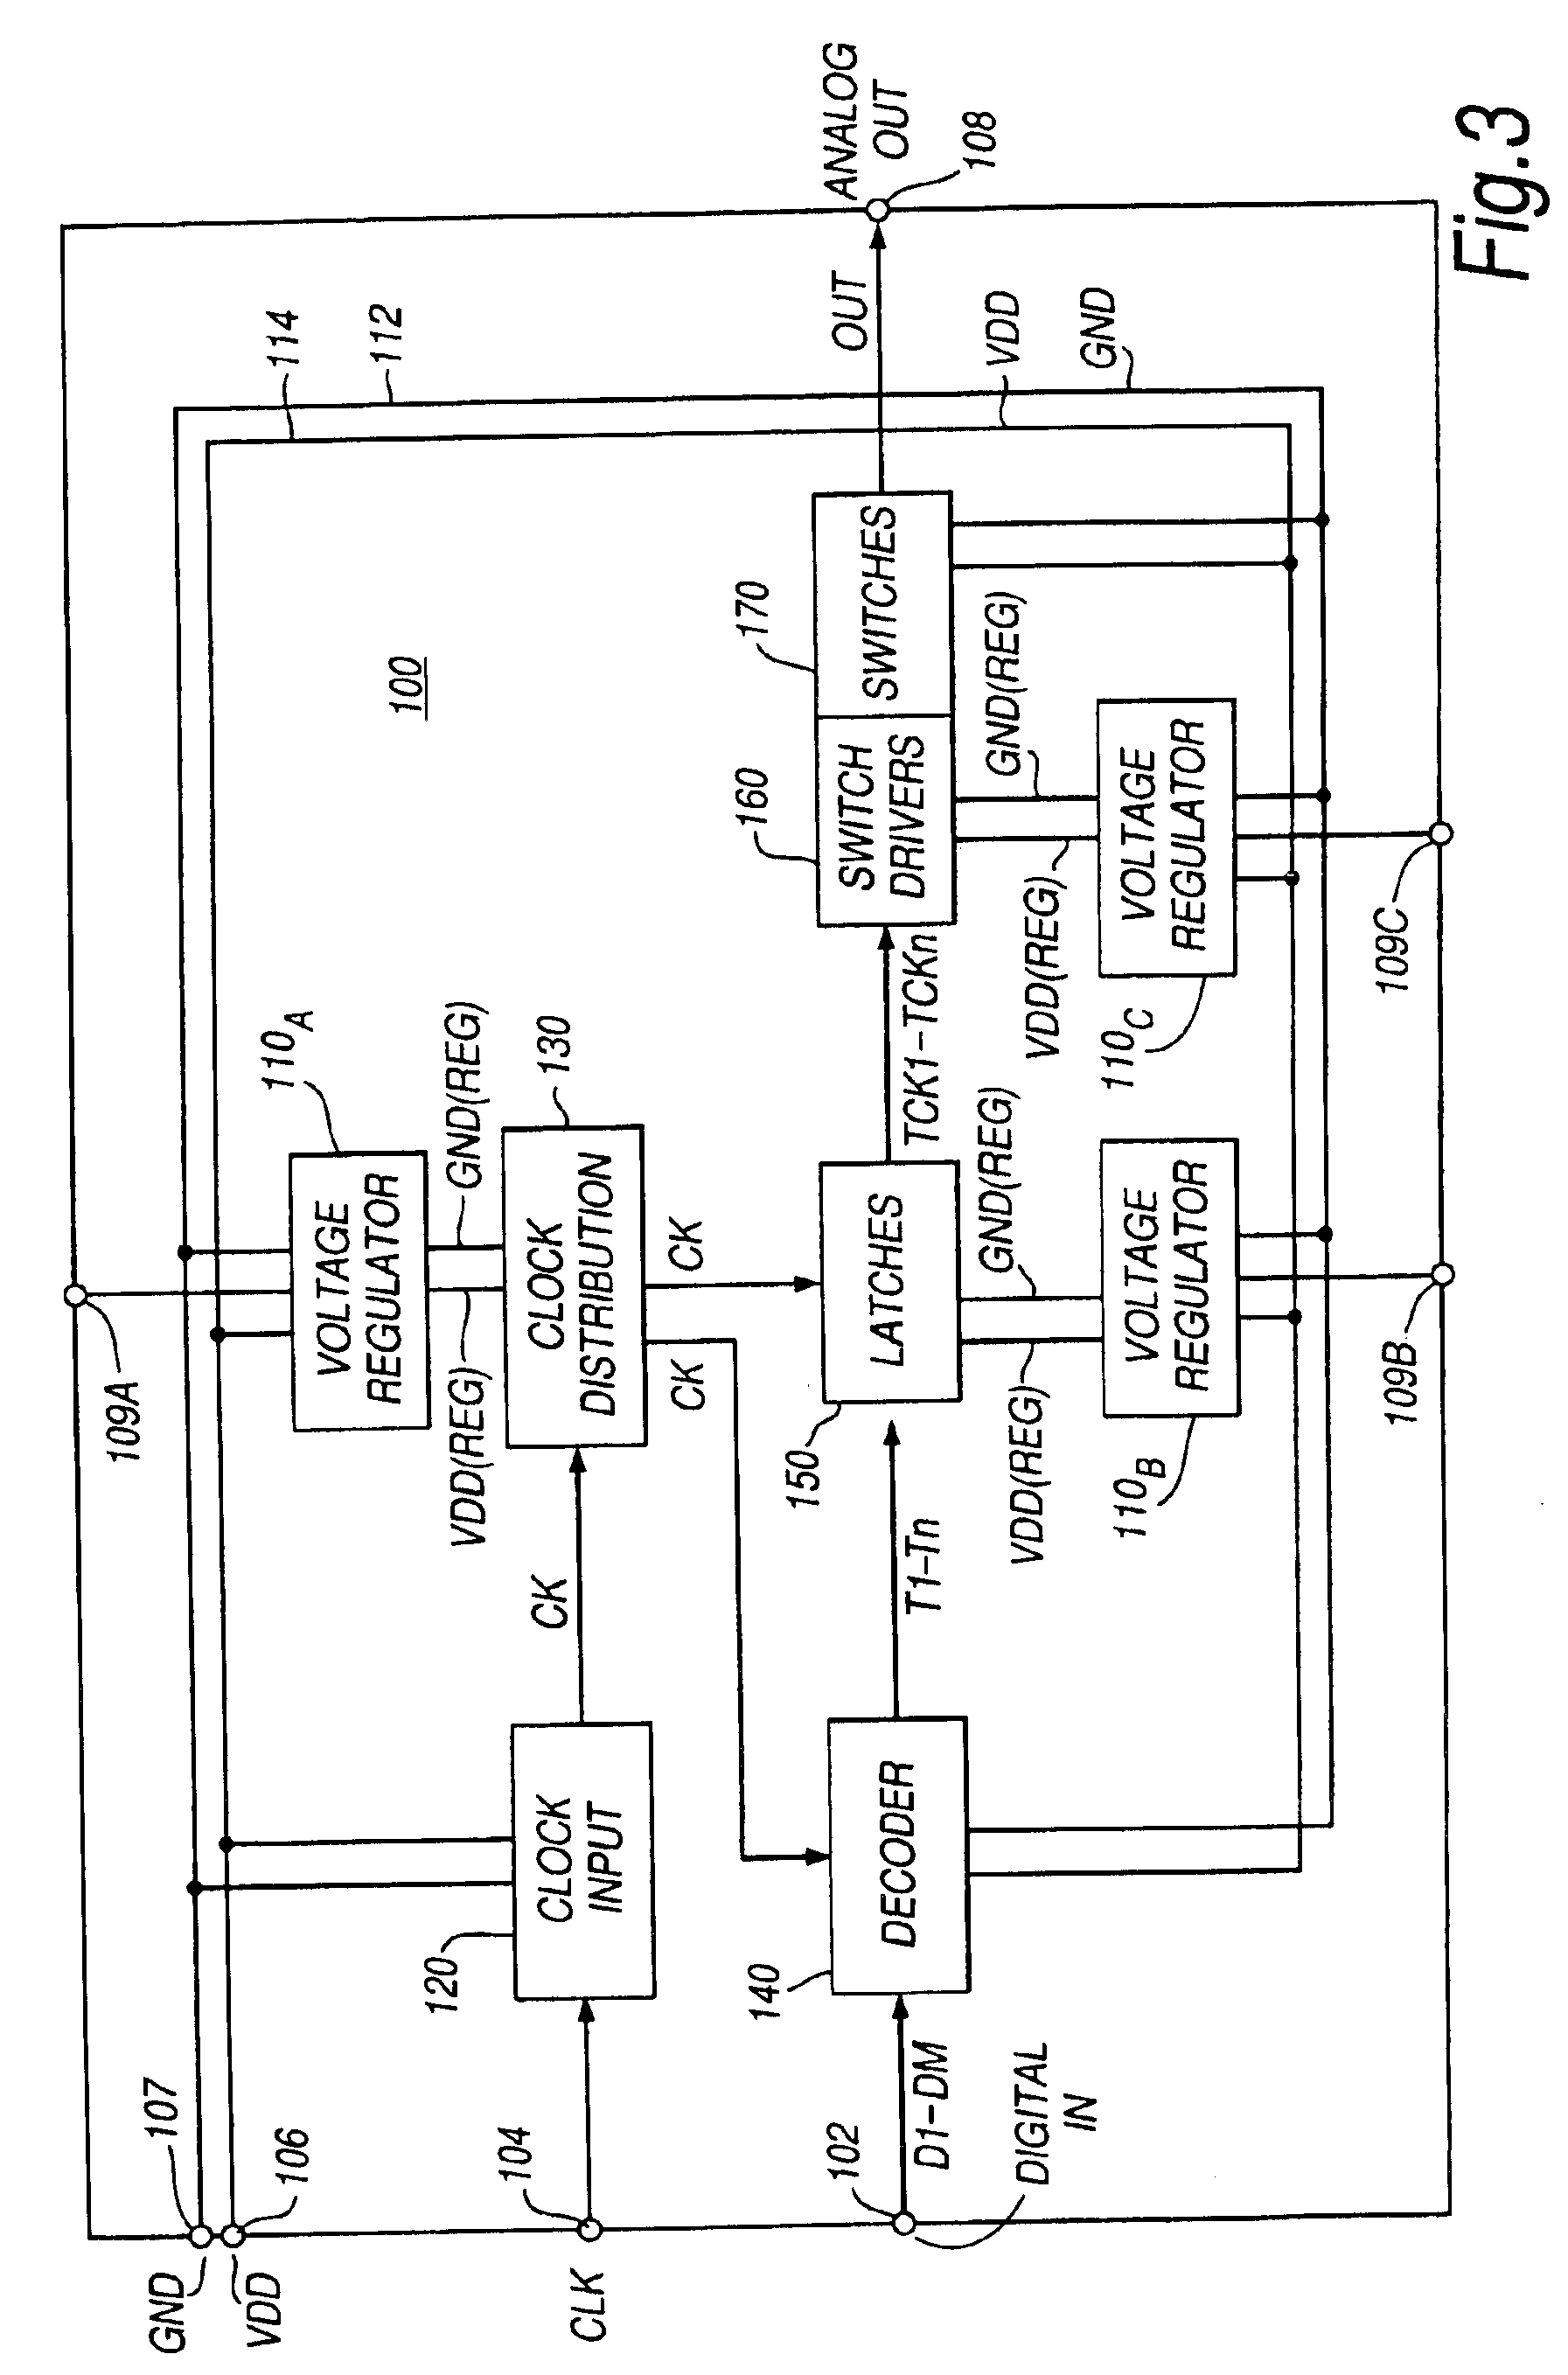 Reducing jitter in mixed-signal integrated circuit devices